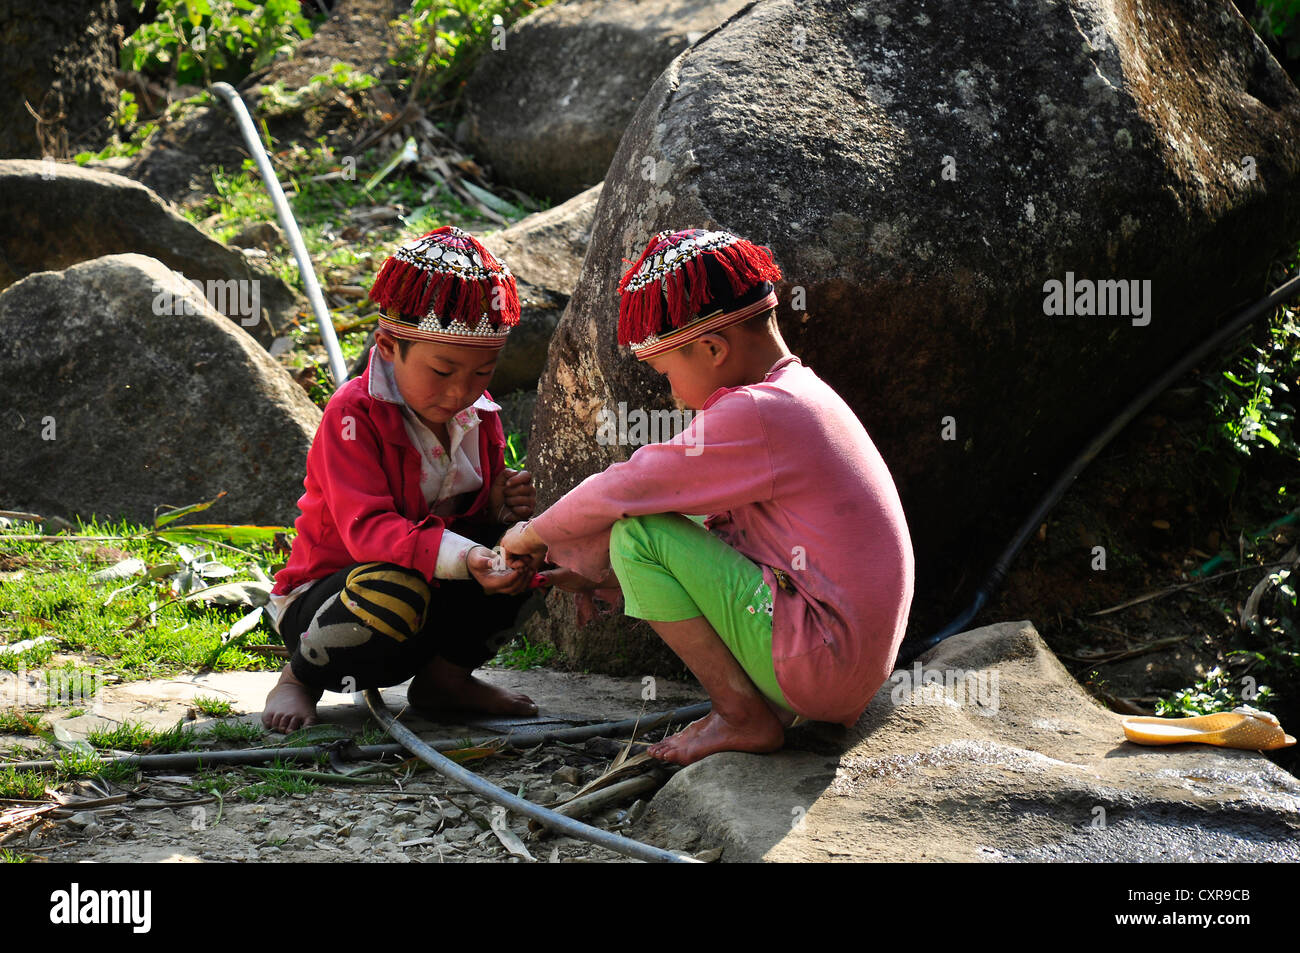 Boys at play, member of the Red Dao ethnic minority, in the countryside near Sa Pa, Northern Vietnam, Vietnam, Southeast Asia Stock Photo